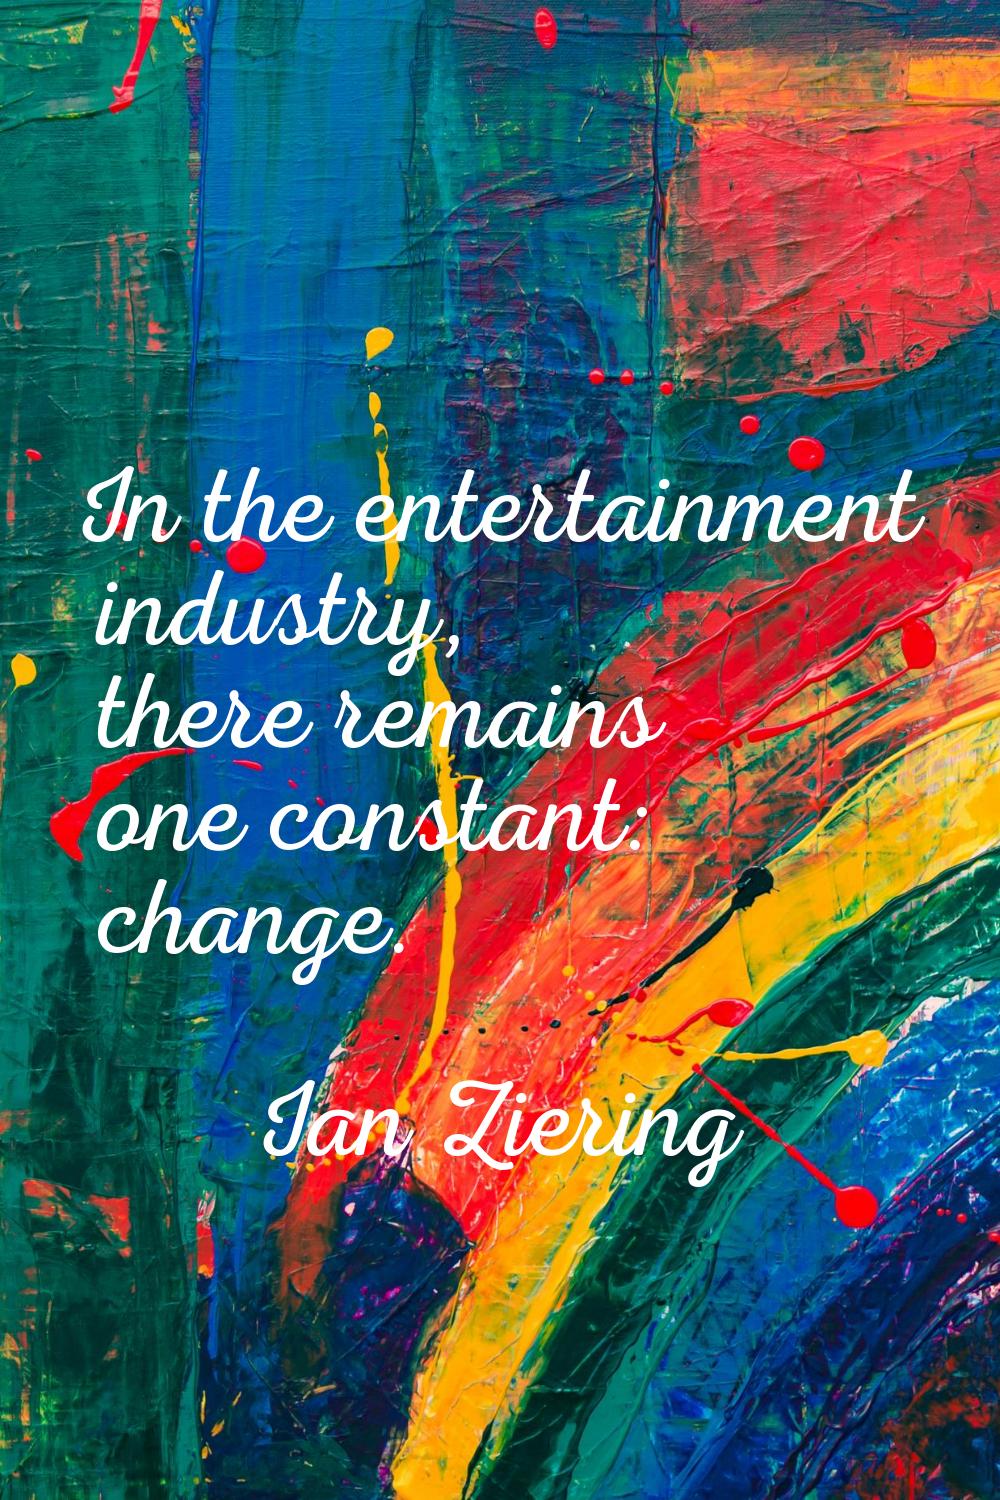 In the entertainment industry, there remains one constant: change.